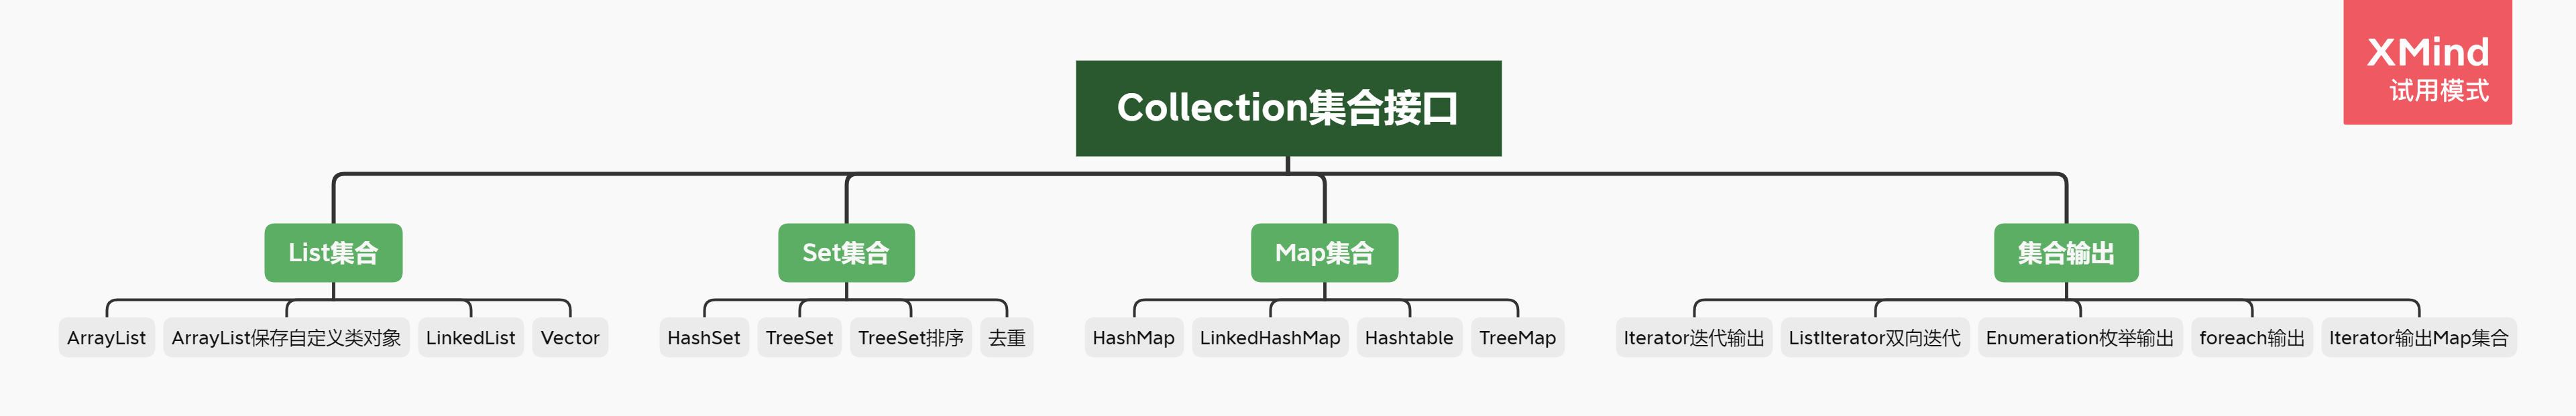 Collection集合接口